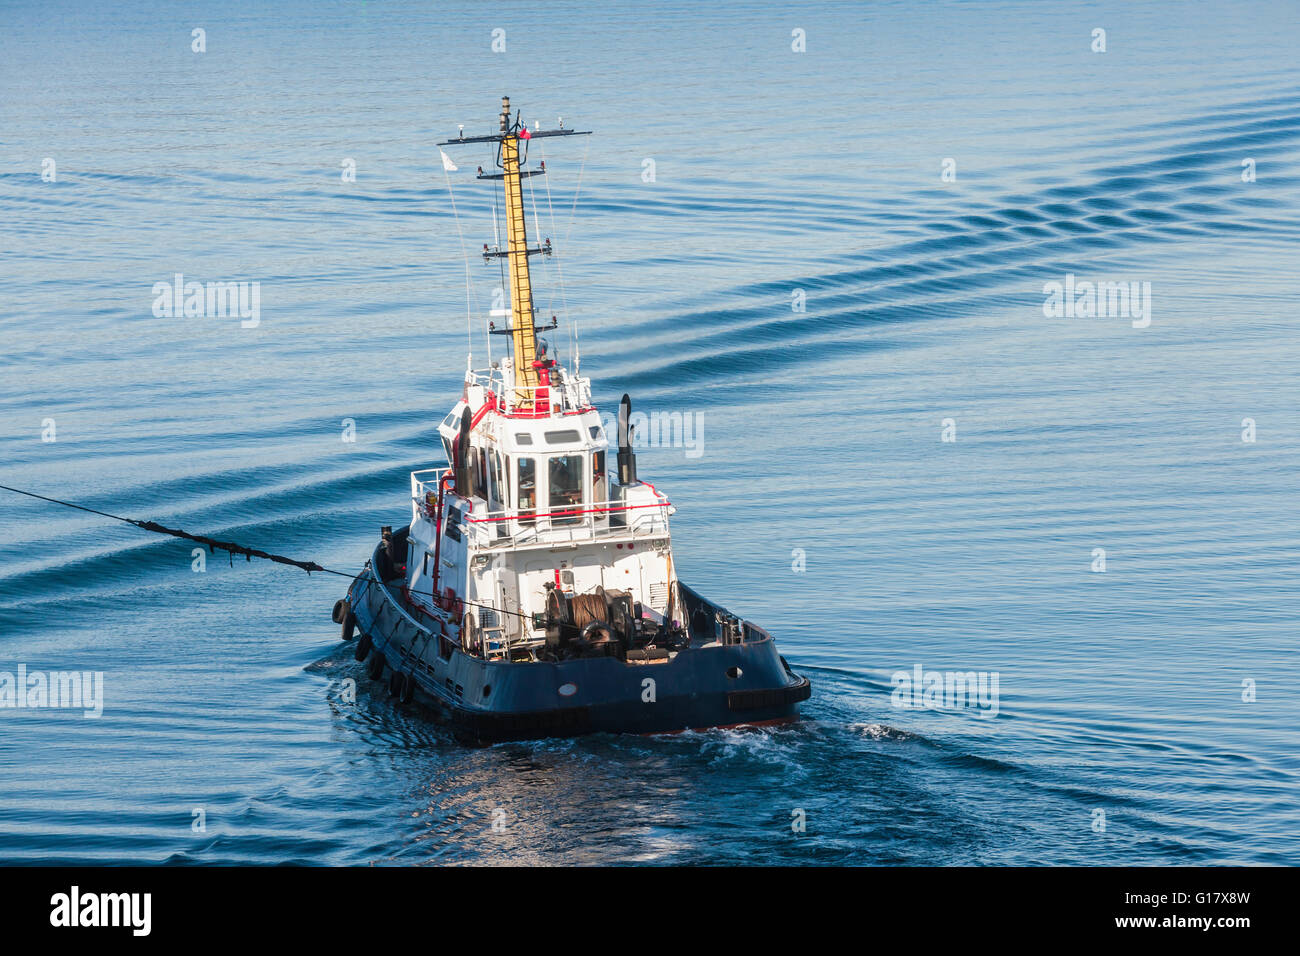 Tug boat with white superstructure underway pulling the rope, rear view Stock Photo